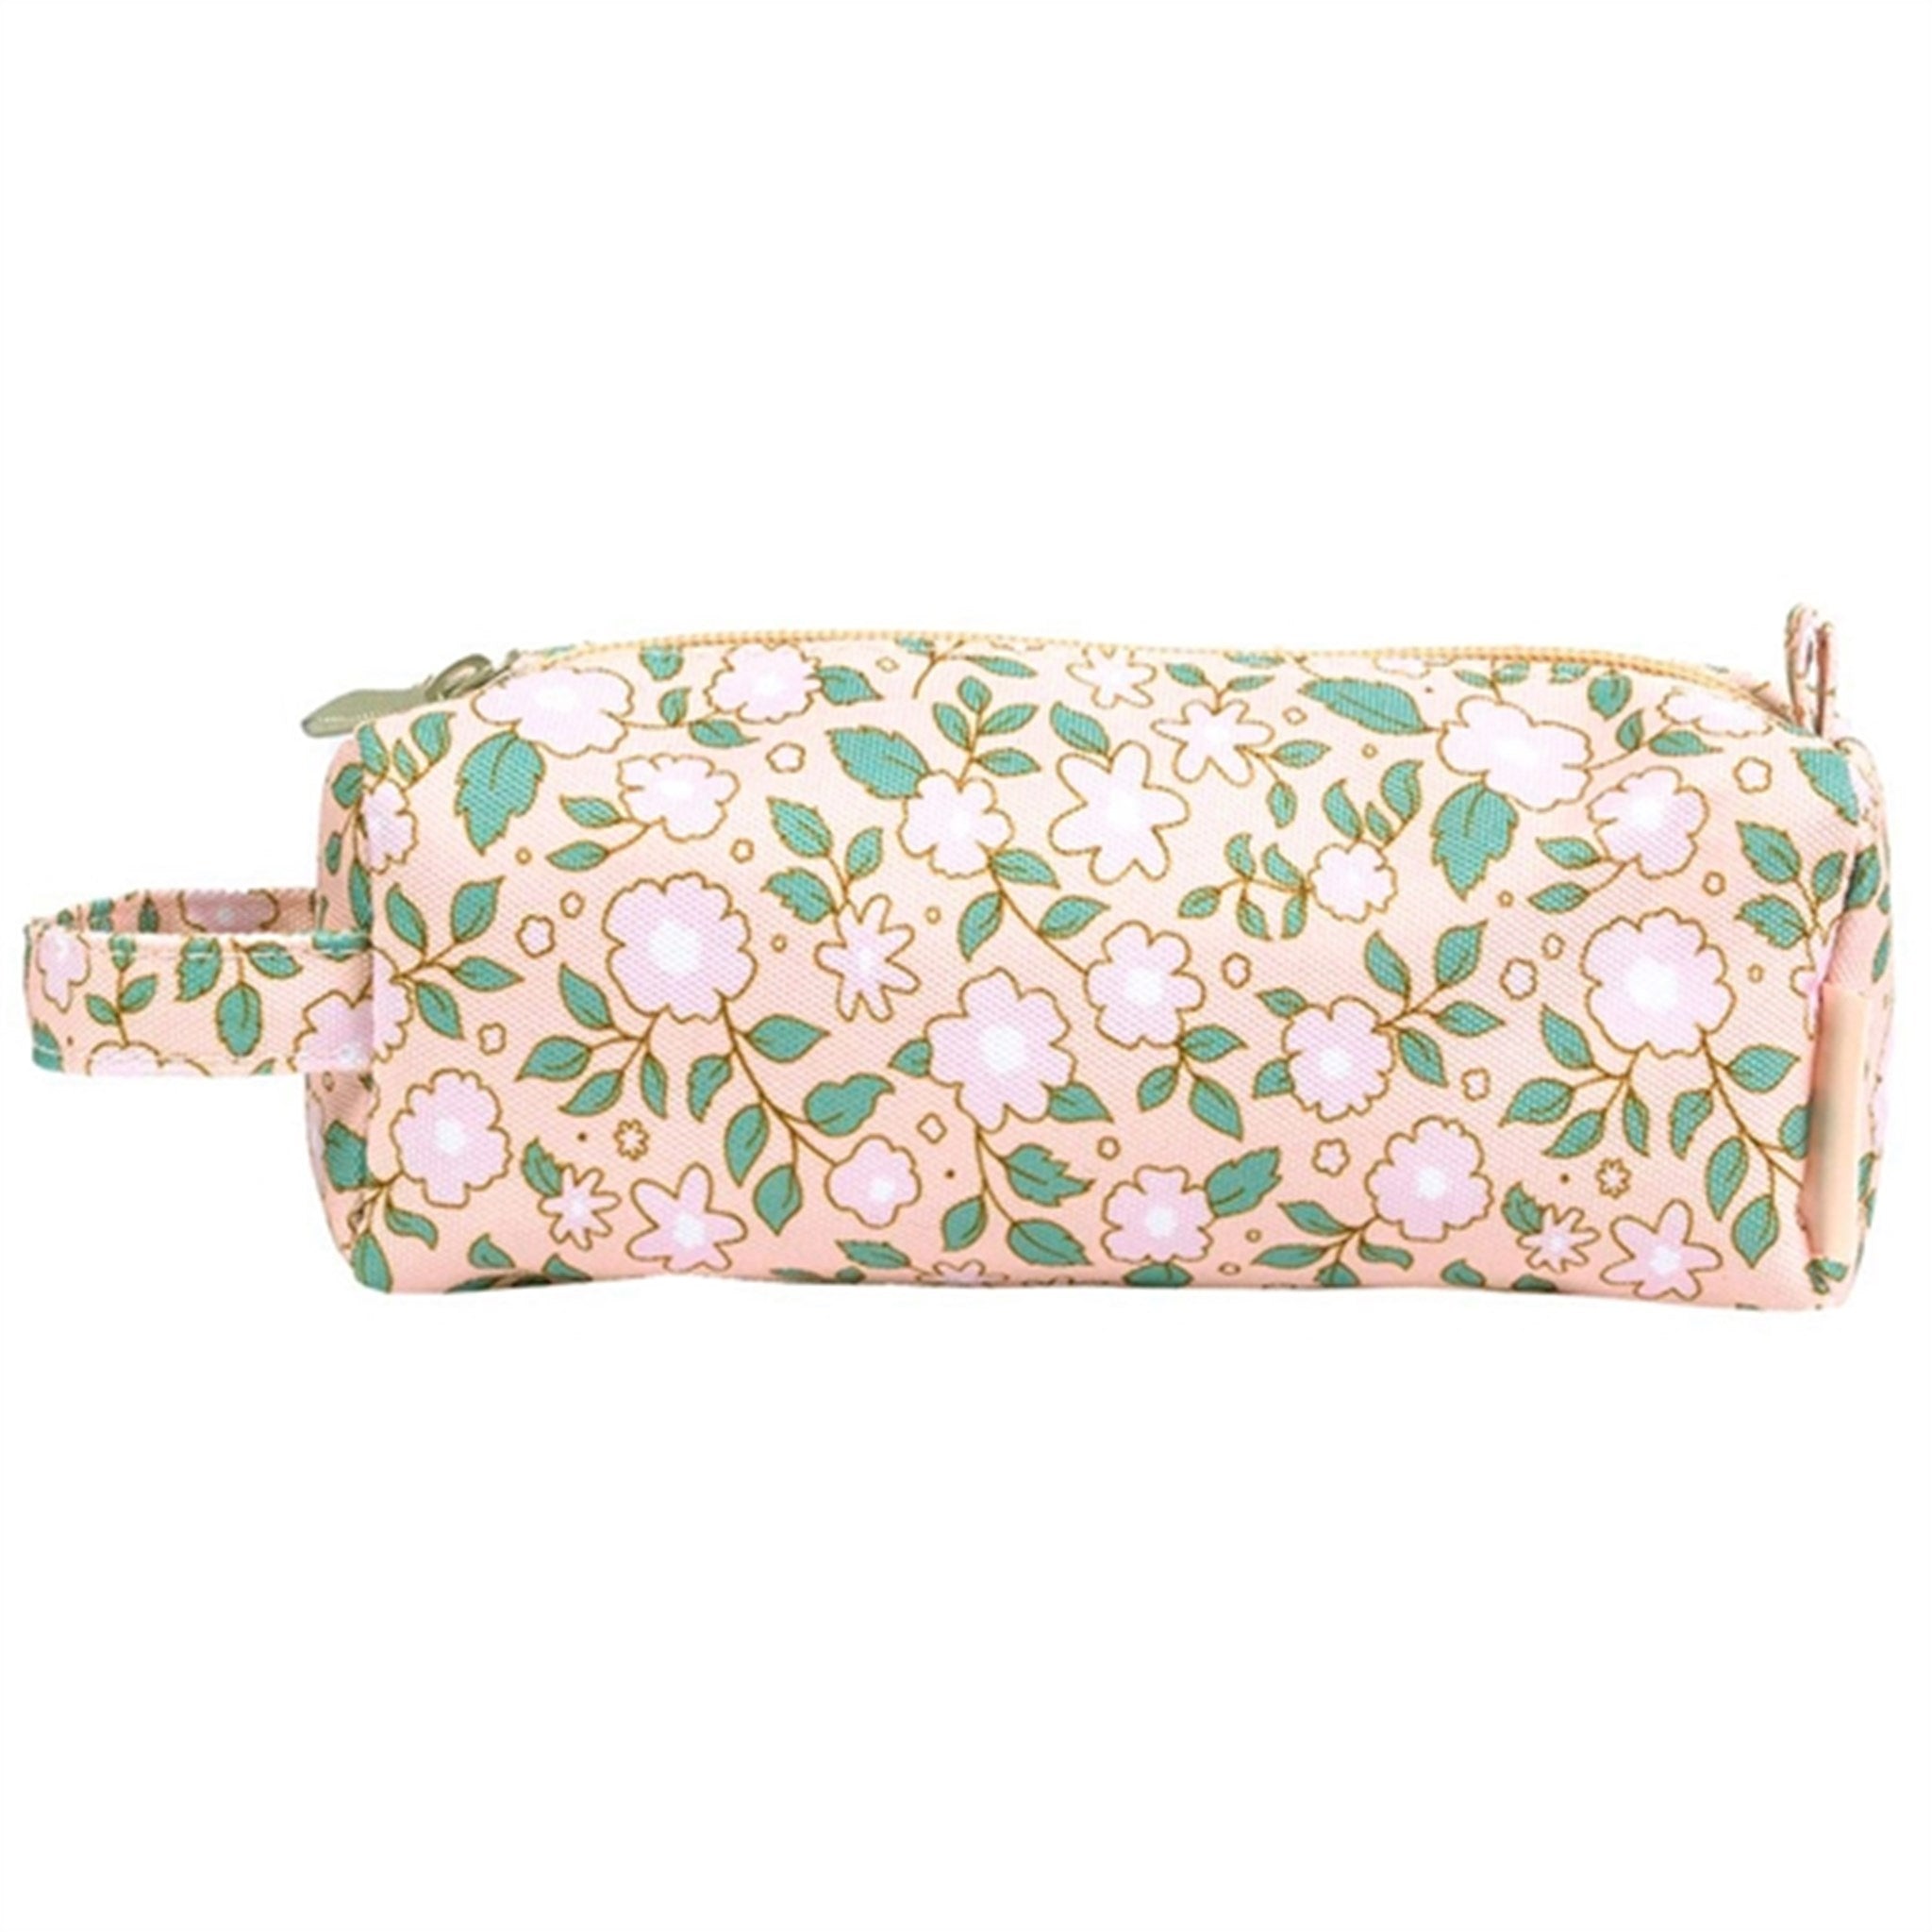 A Little Lovely Company Pencil Case Blossom Pink